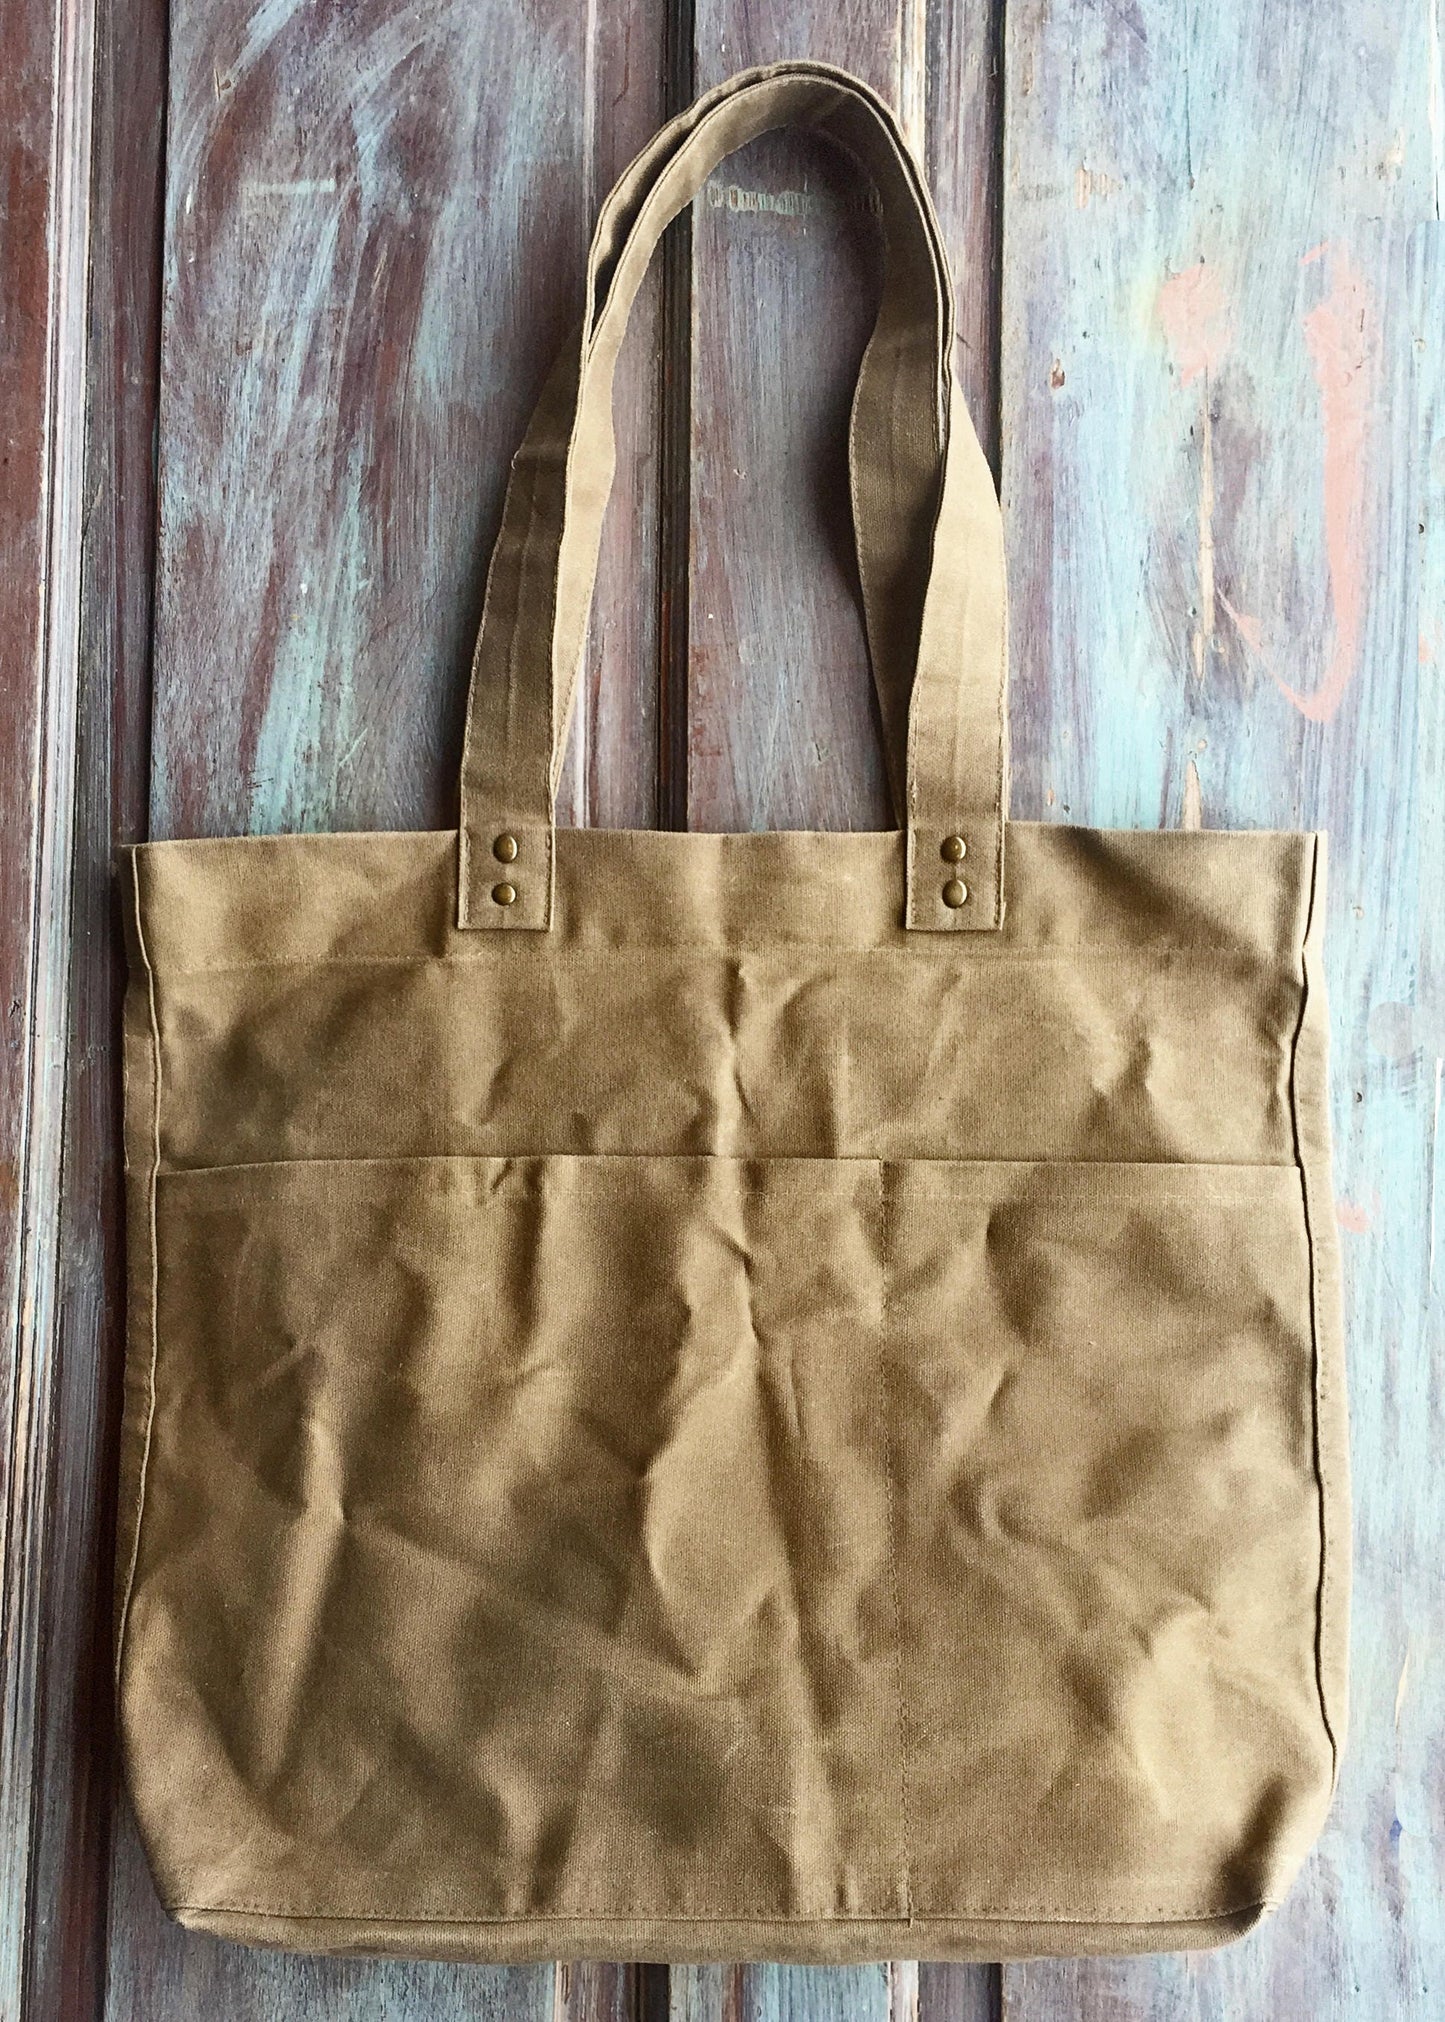 Waxed Canvas Tote Bag, Large Waxed Canvas Tote, Market Bag, Diaper Bag, Laptop Bag, Hand Waxed Canvas in 24 colors,